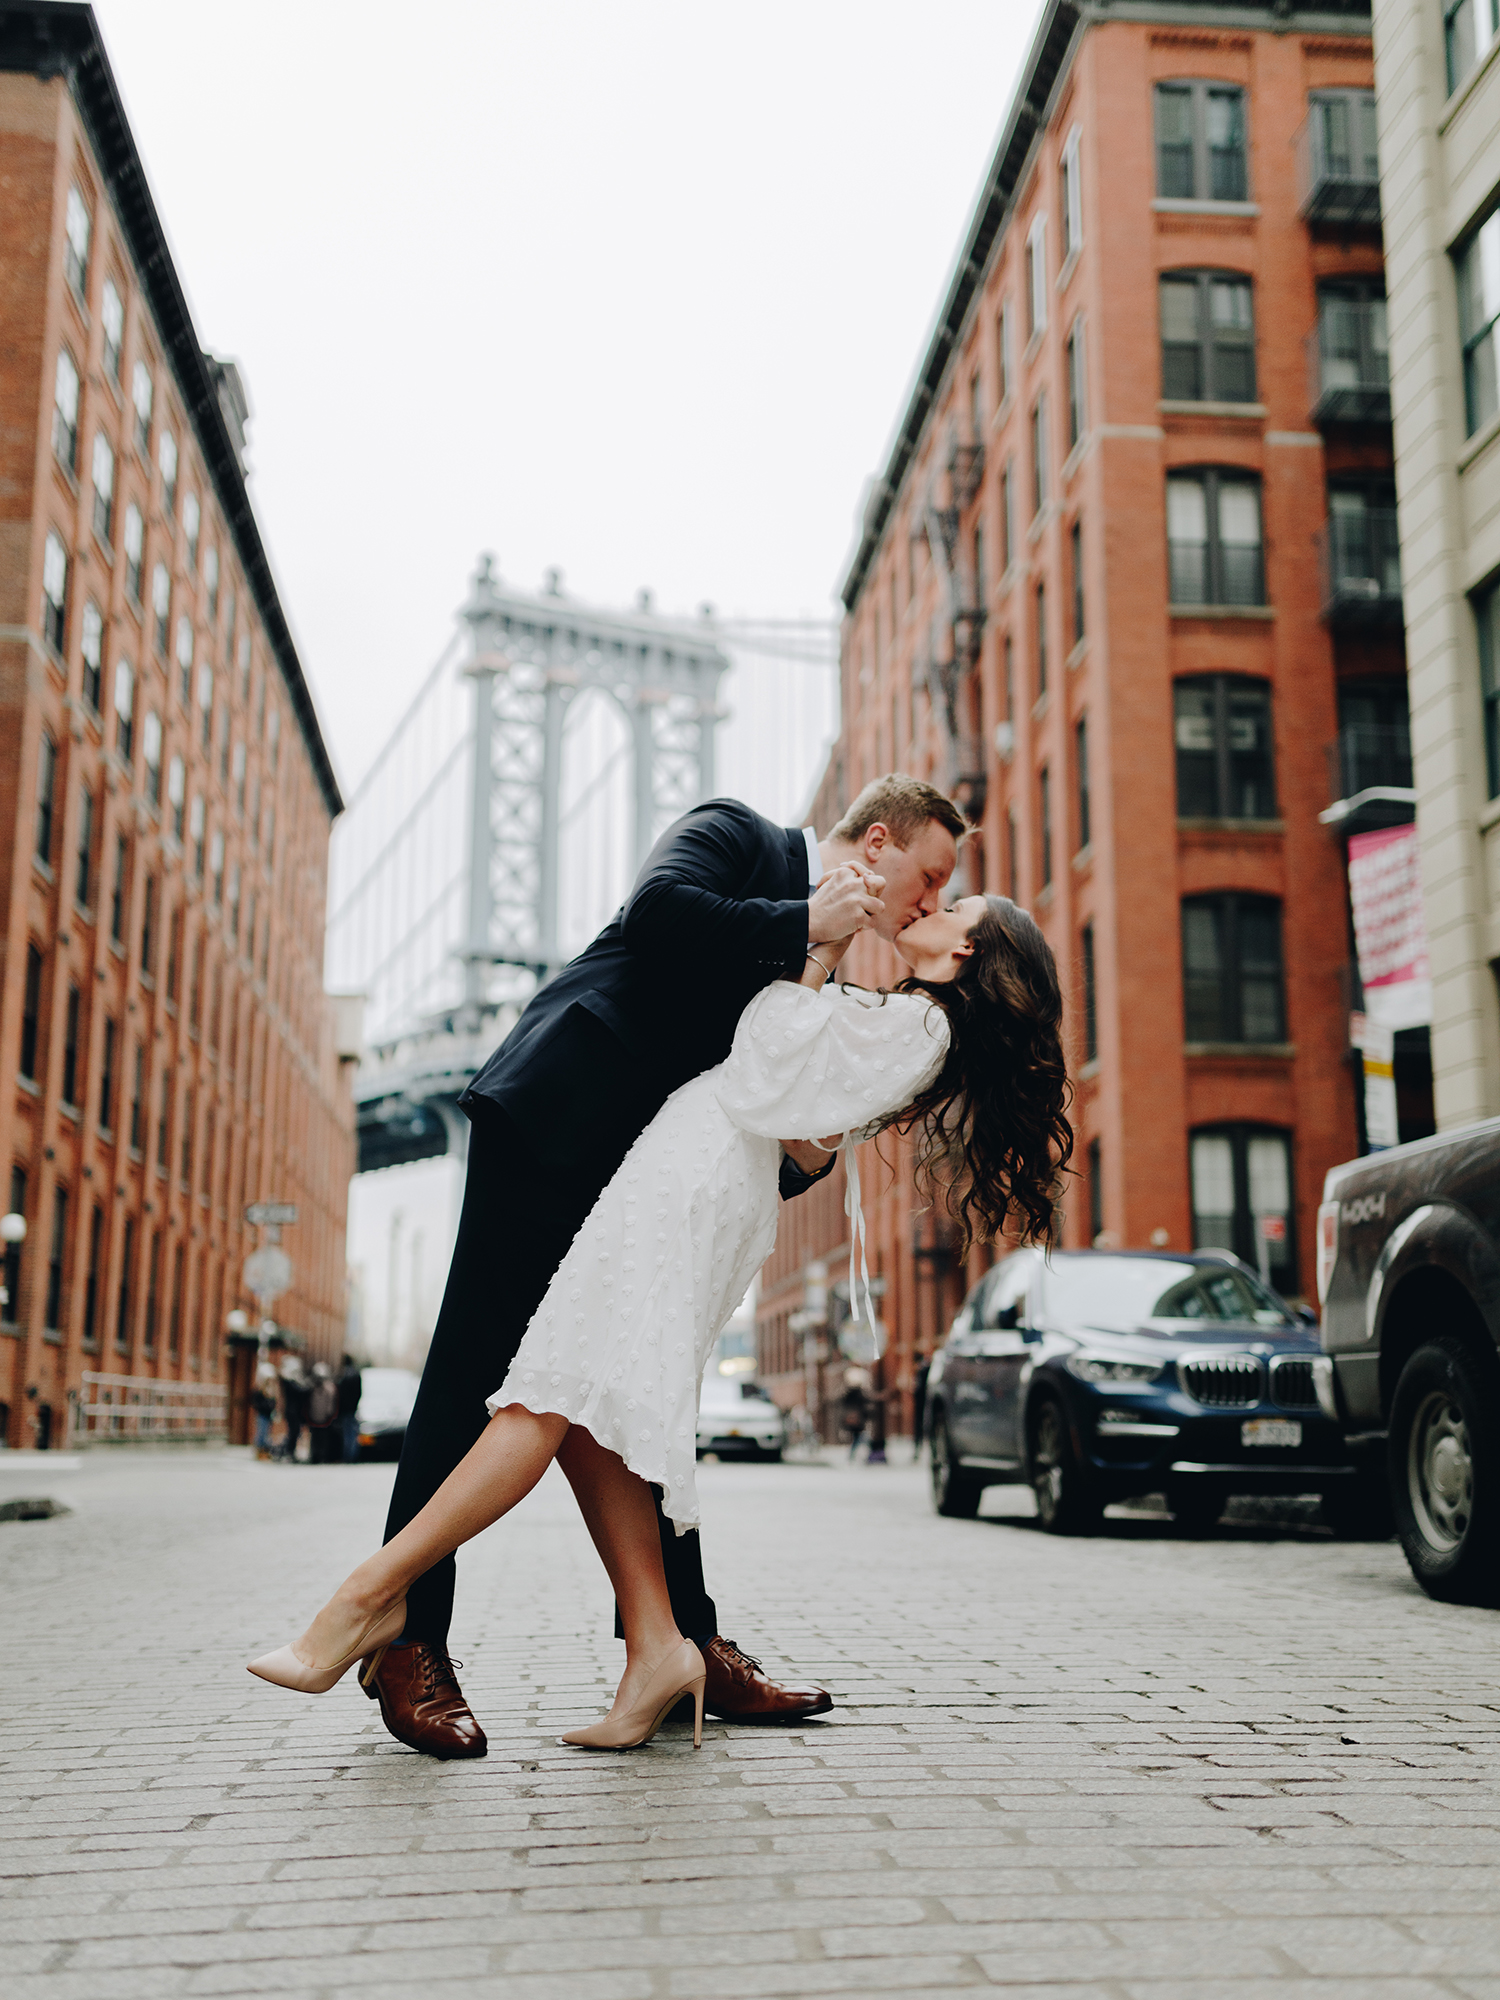 Should You Get Professional Hair & Makeup for Engagement Photos?